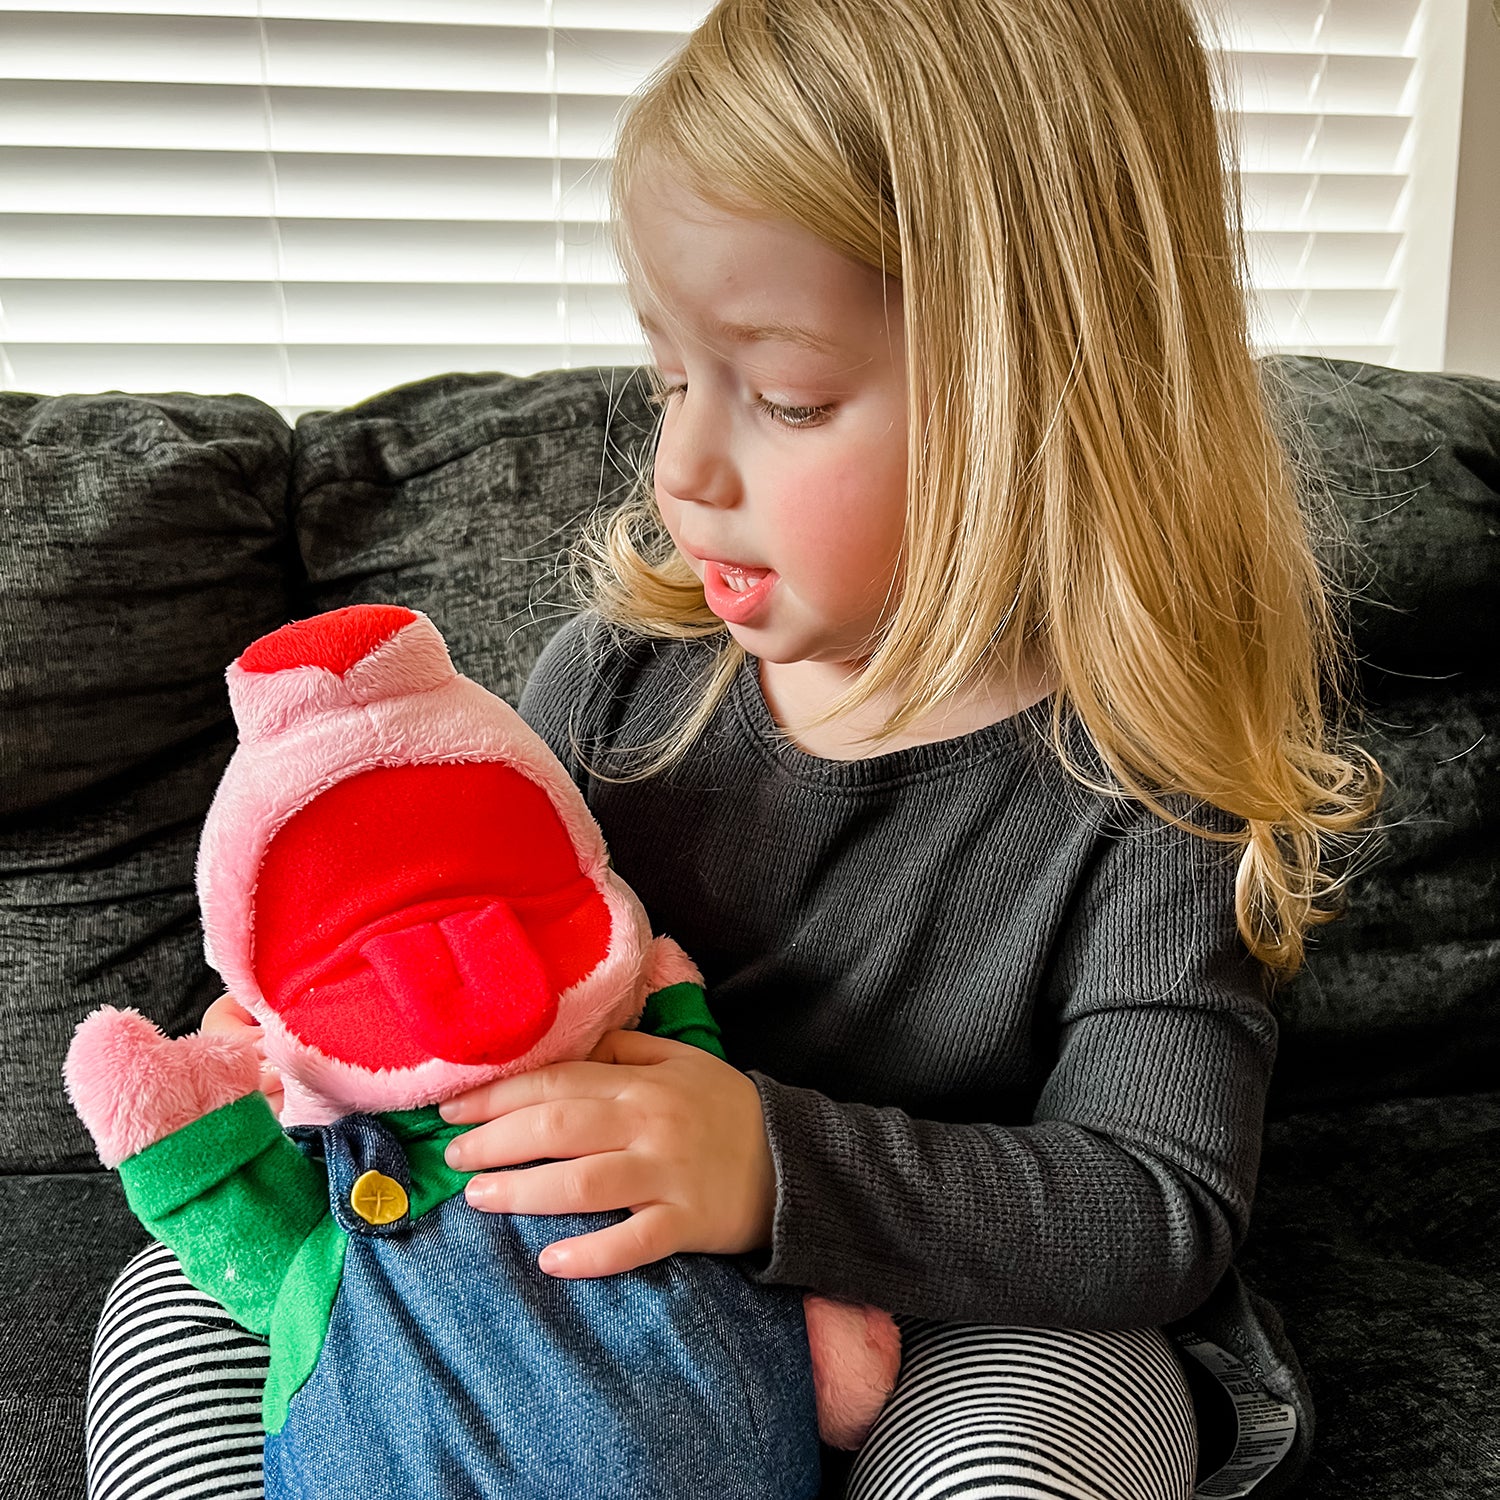 Pickles Pig Puppet by SimplyFun perfect for imaginative play for ages 4 and up